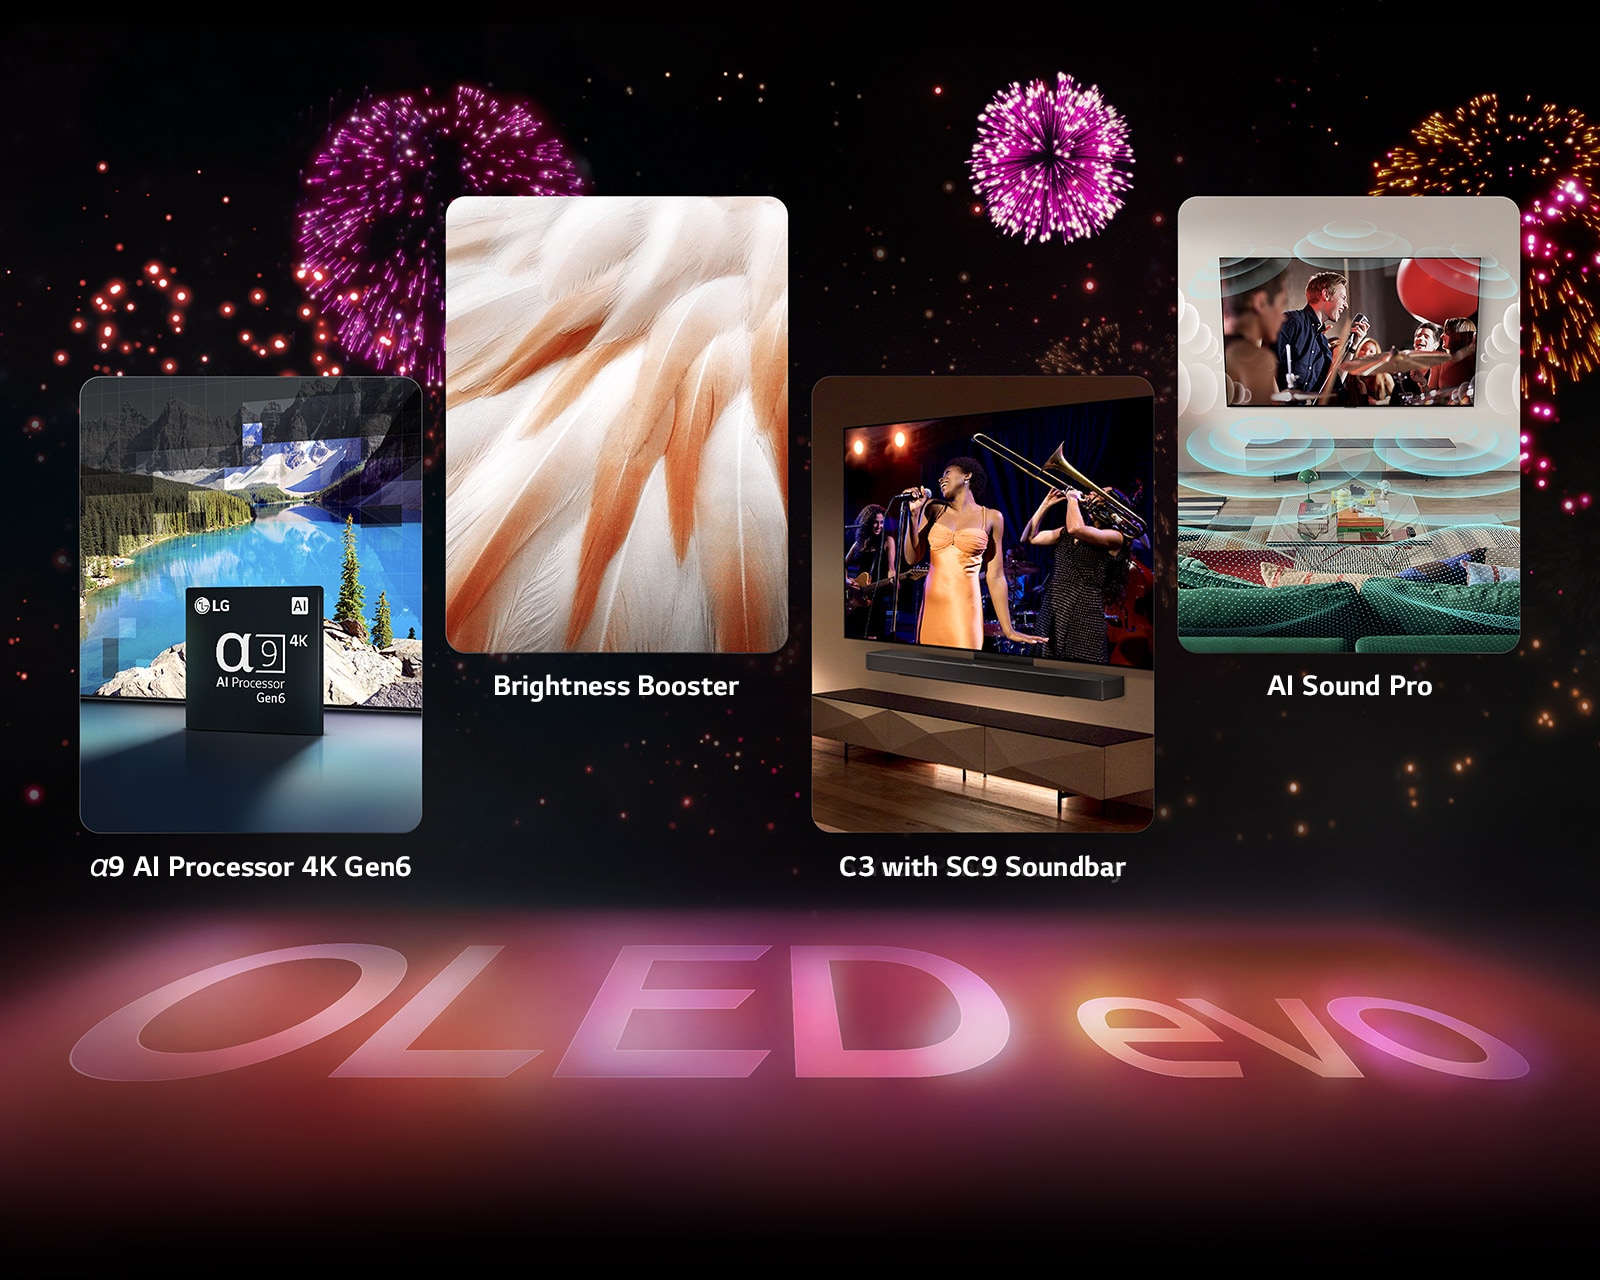 An image presenting the key features of the LG OLED evo C3 against a black background with a pink and purple firework display. The pink reflection from the firework display on the ground shows the words "OLED evo." Within the picture, an image depicting the α9 AI Processor 4K Gen6 shows the chip standing before a picture of a lake scene being remastered with the processing technology. An image presenting Brightness Booster Max shows a bird's bright feathers. An image presenting the SC9 Soundbar shows the LG OLED evo C3 and SC9 Soundbar neatly on the wall with a music concert playing on the TV. An image presenting AI Sound Pro shows a rock show playing on the TV with music bubbles depicting soundwaves filling the living space.